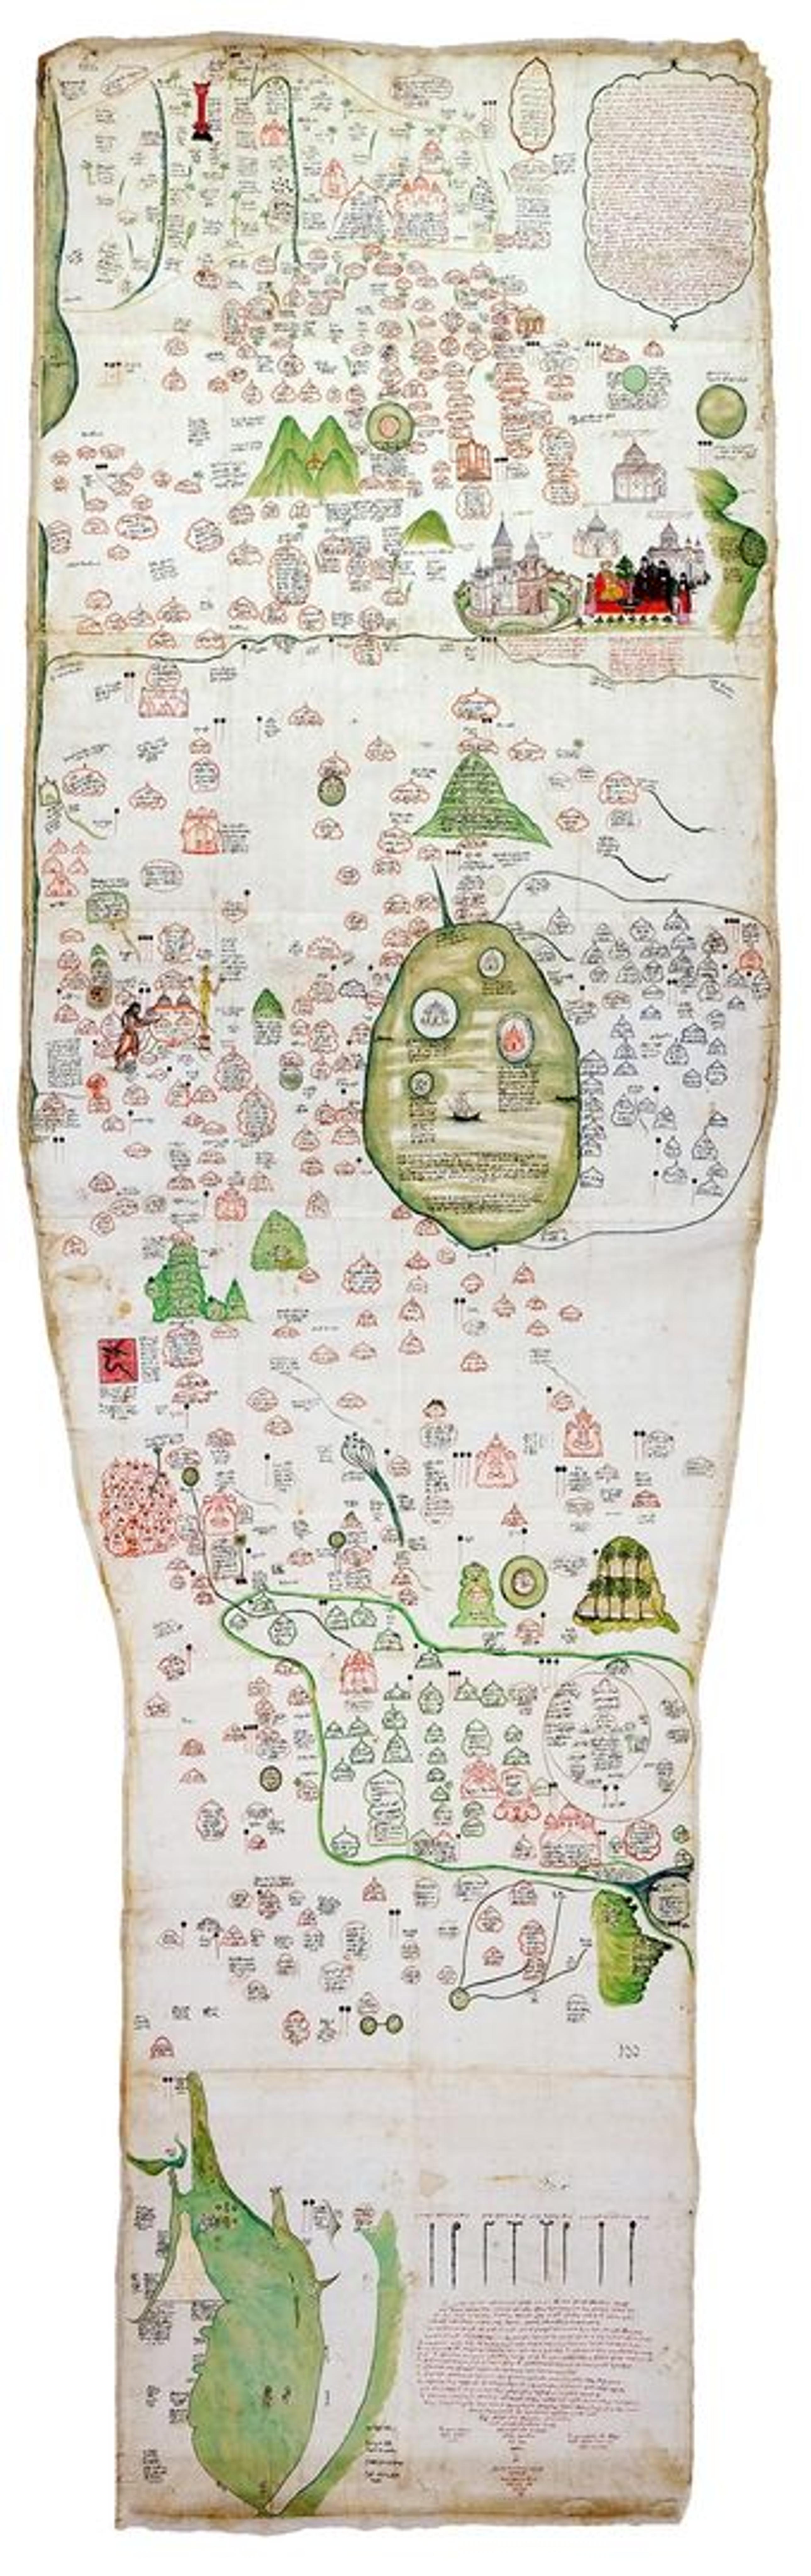 A map called the Tabula Chorographica Armenica which is about four feet wide and eleven feet tall with drawings on it